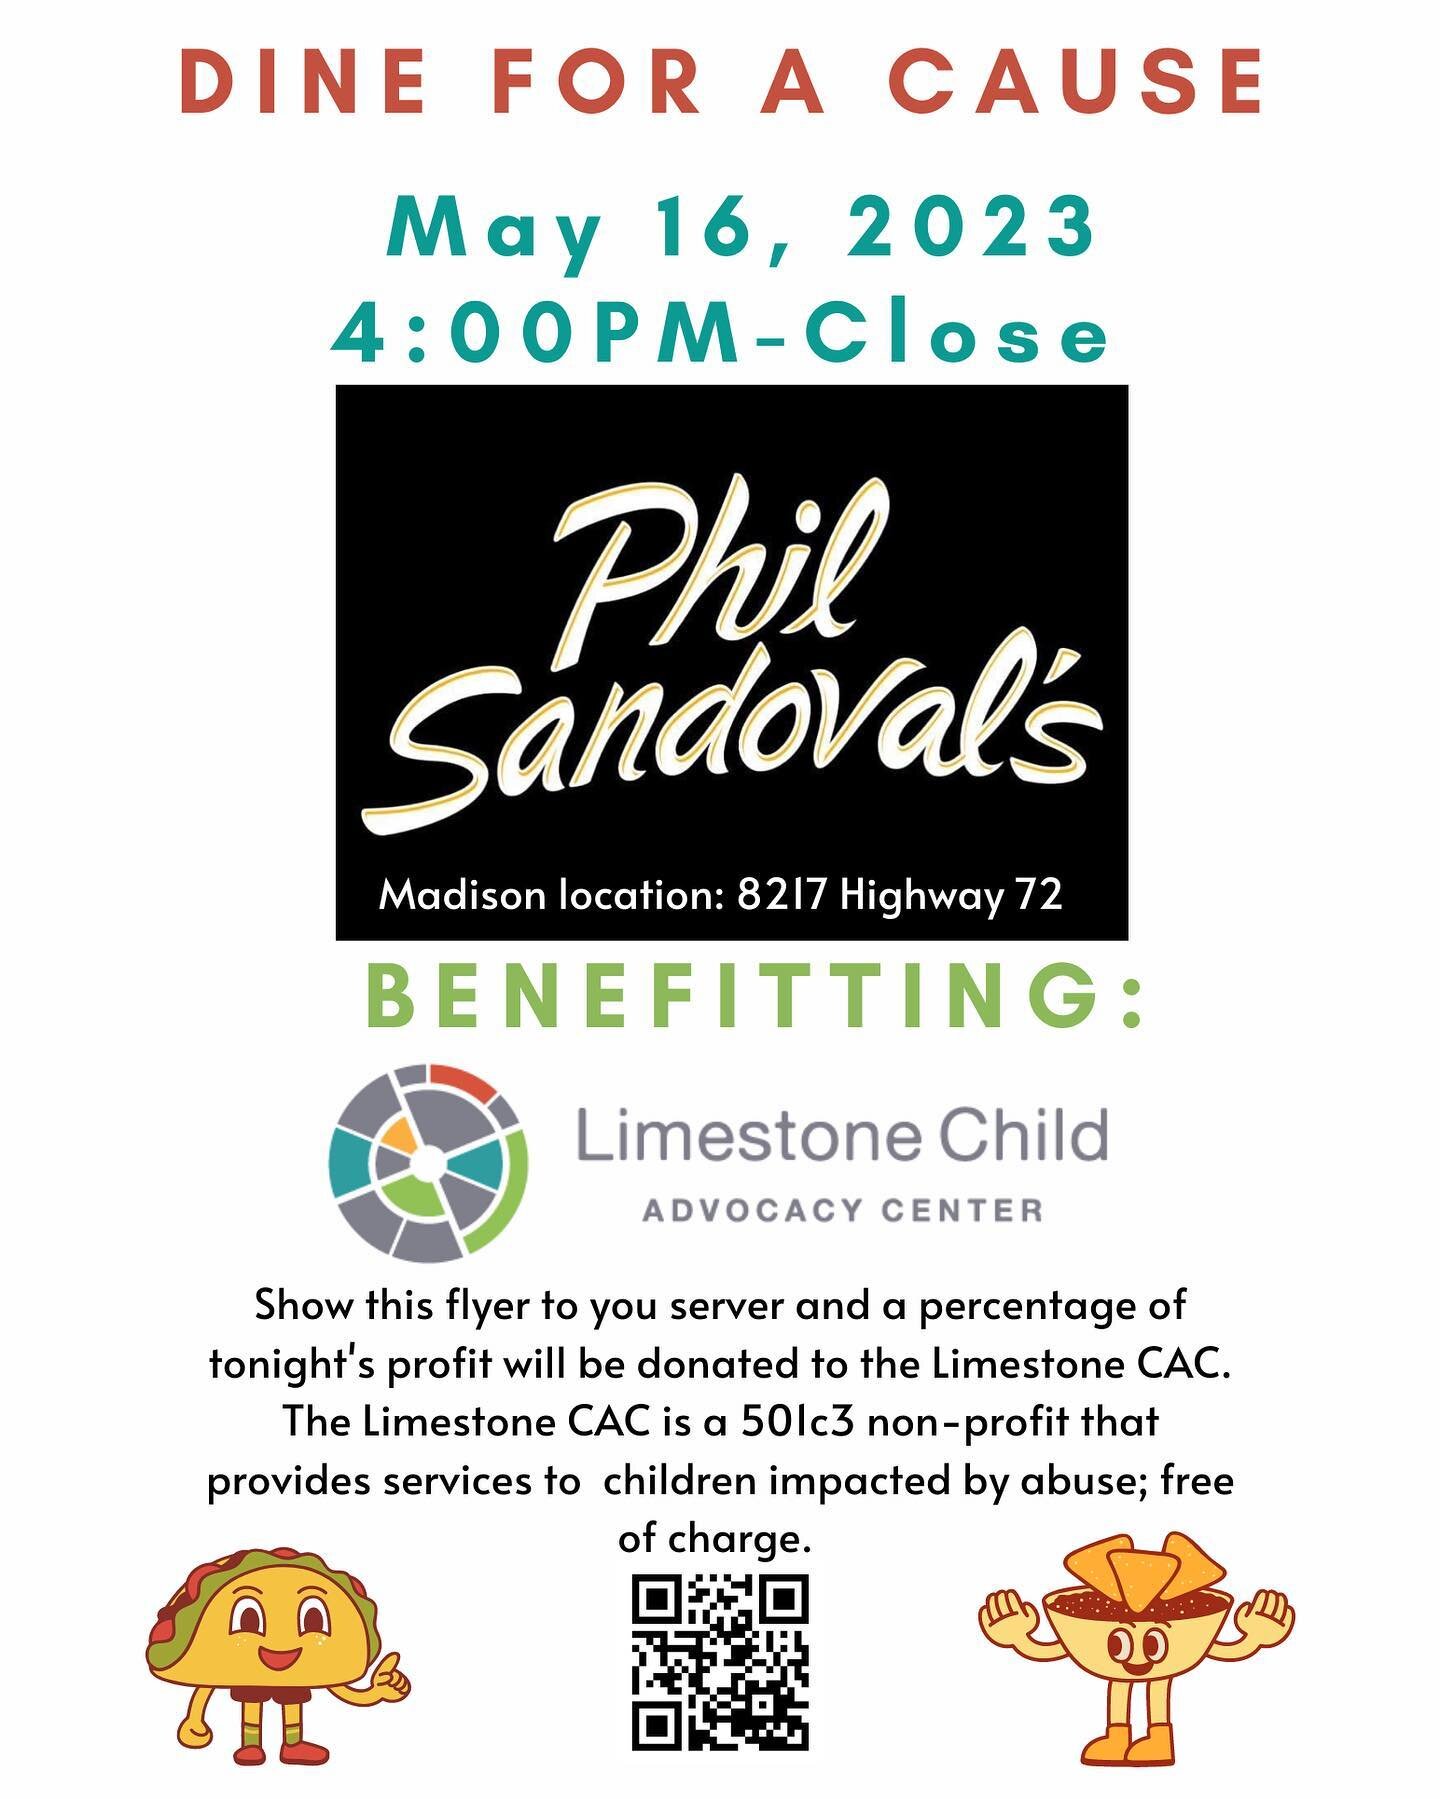 Mark your calendars! 🗓️
Join us May 16th 4:00pm-Close @phil.sandovals (Madison location) and dine for a cause! 
Let your server know you are dining for the @limestone_cac. 
We hope to see you there! 🌮❤️